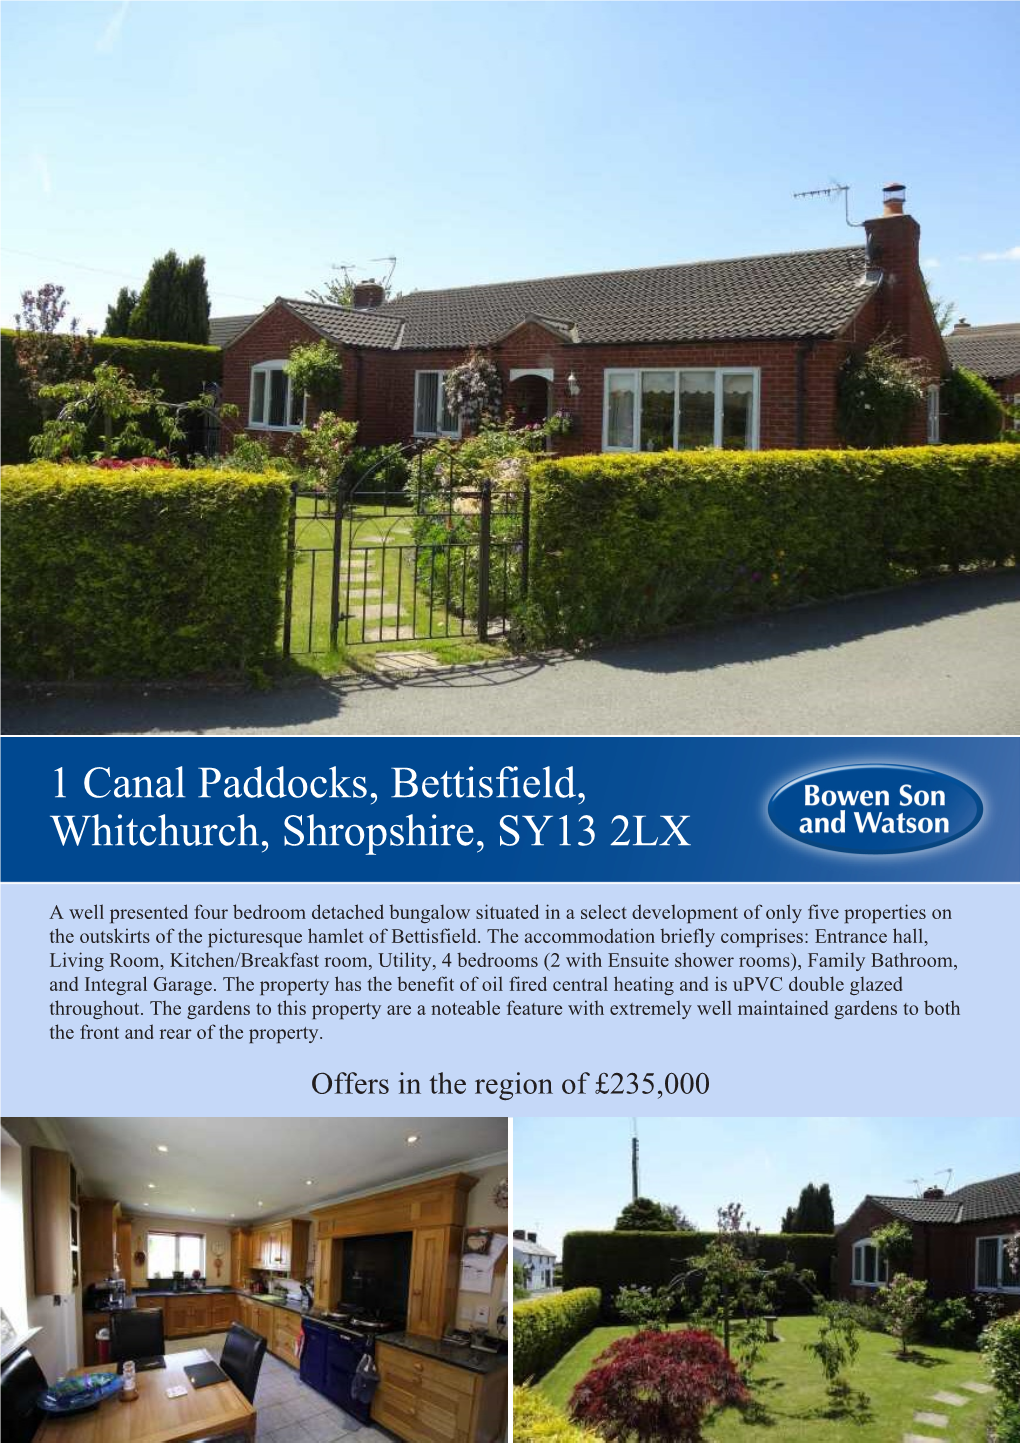 1 Canal Paddocks, Bettisfield, Whitchurch, Shropshire, SY13 2LX